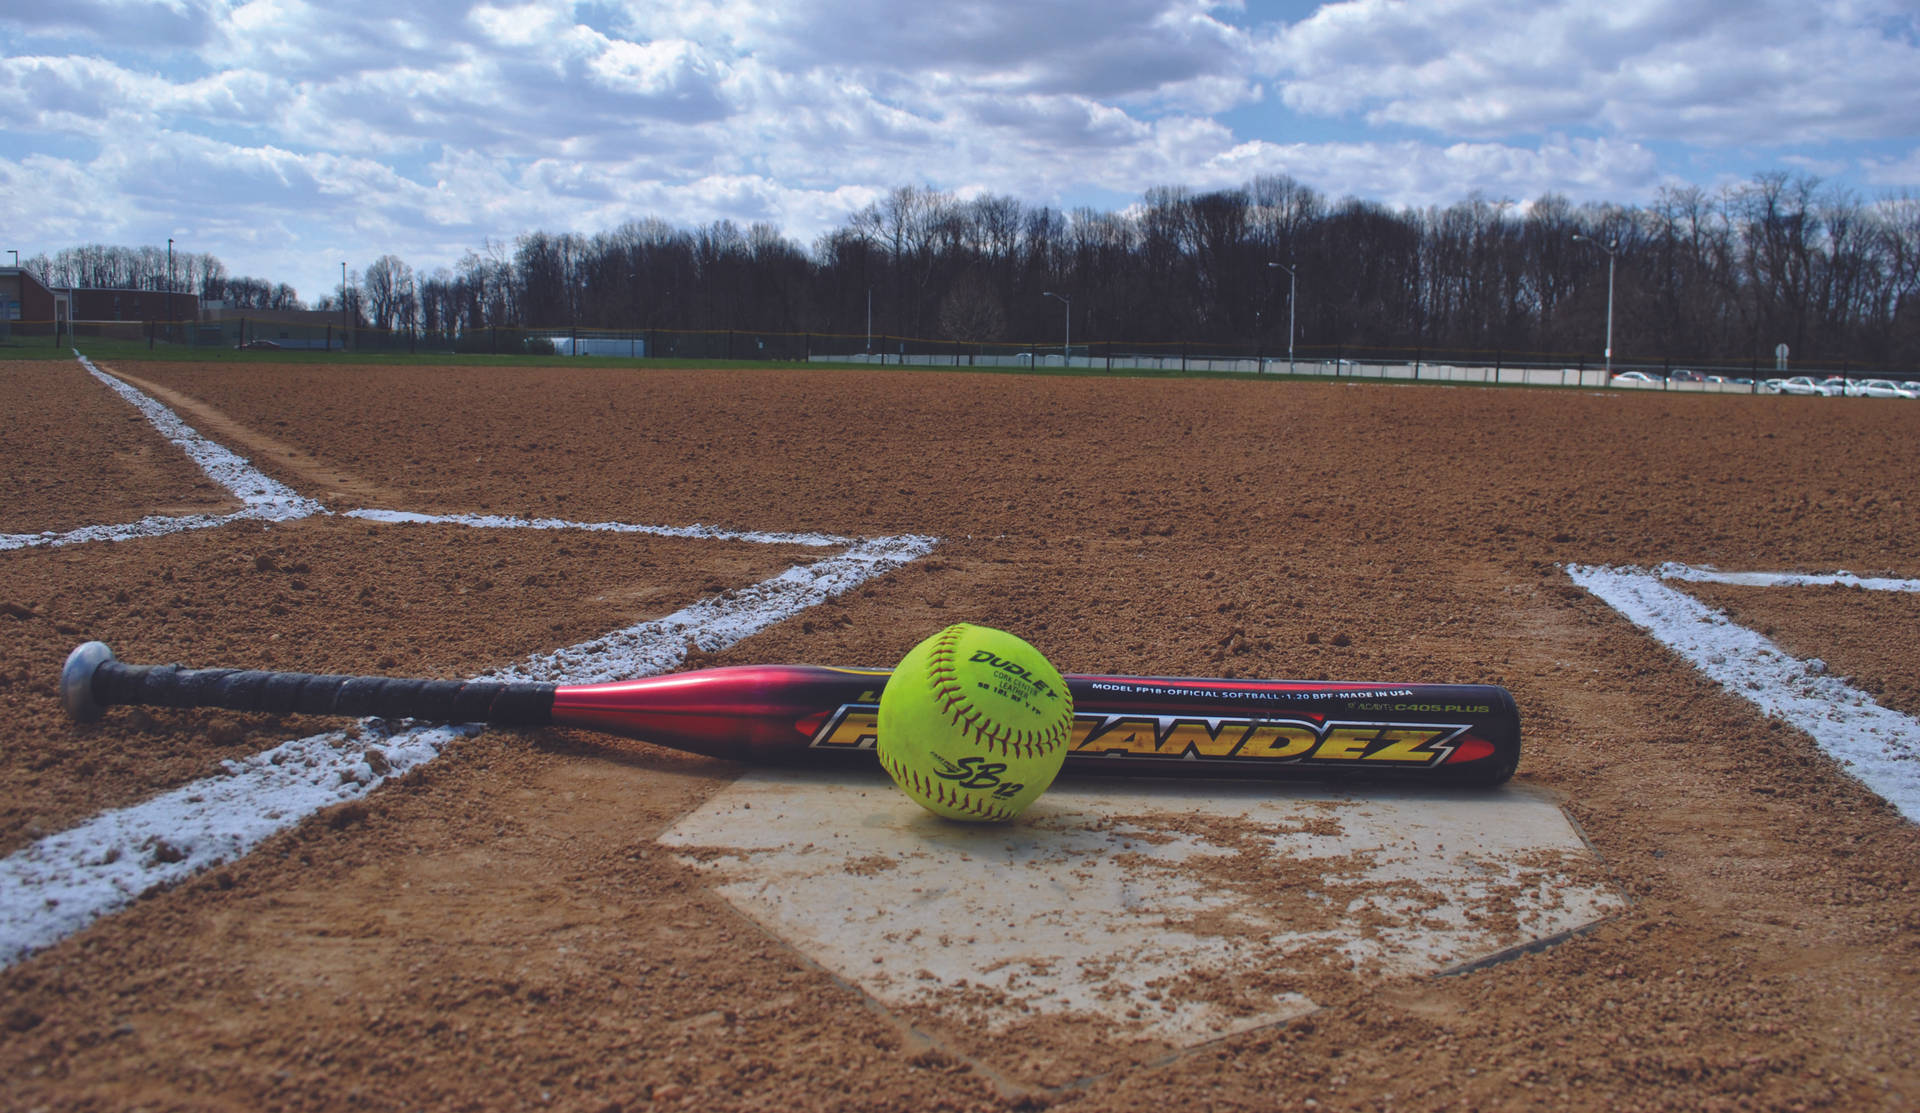 Softball And Bat On The Field Wallpaper